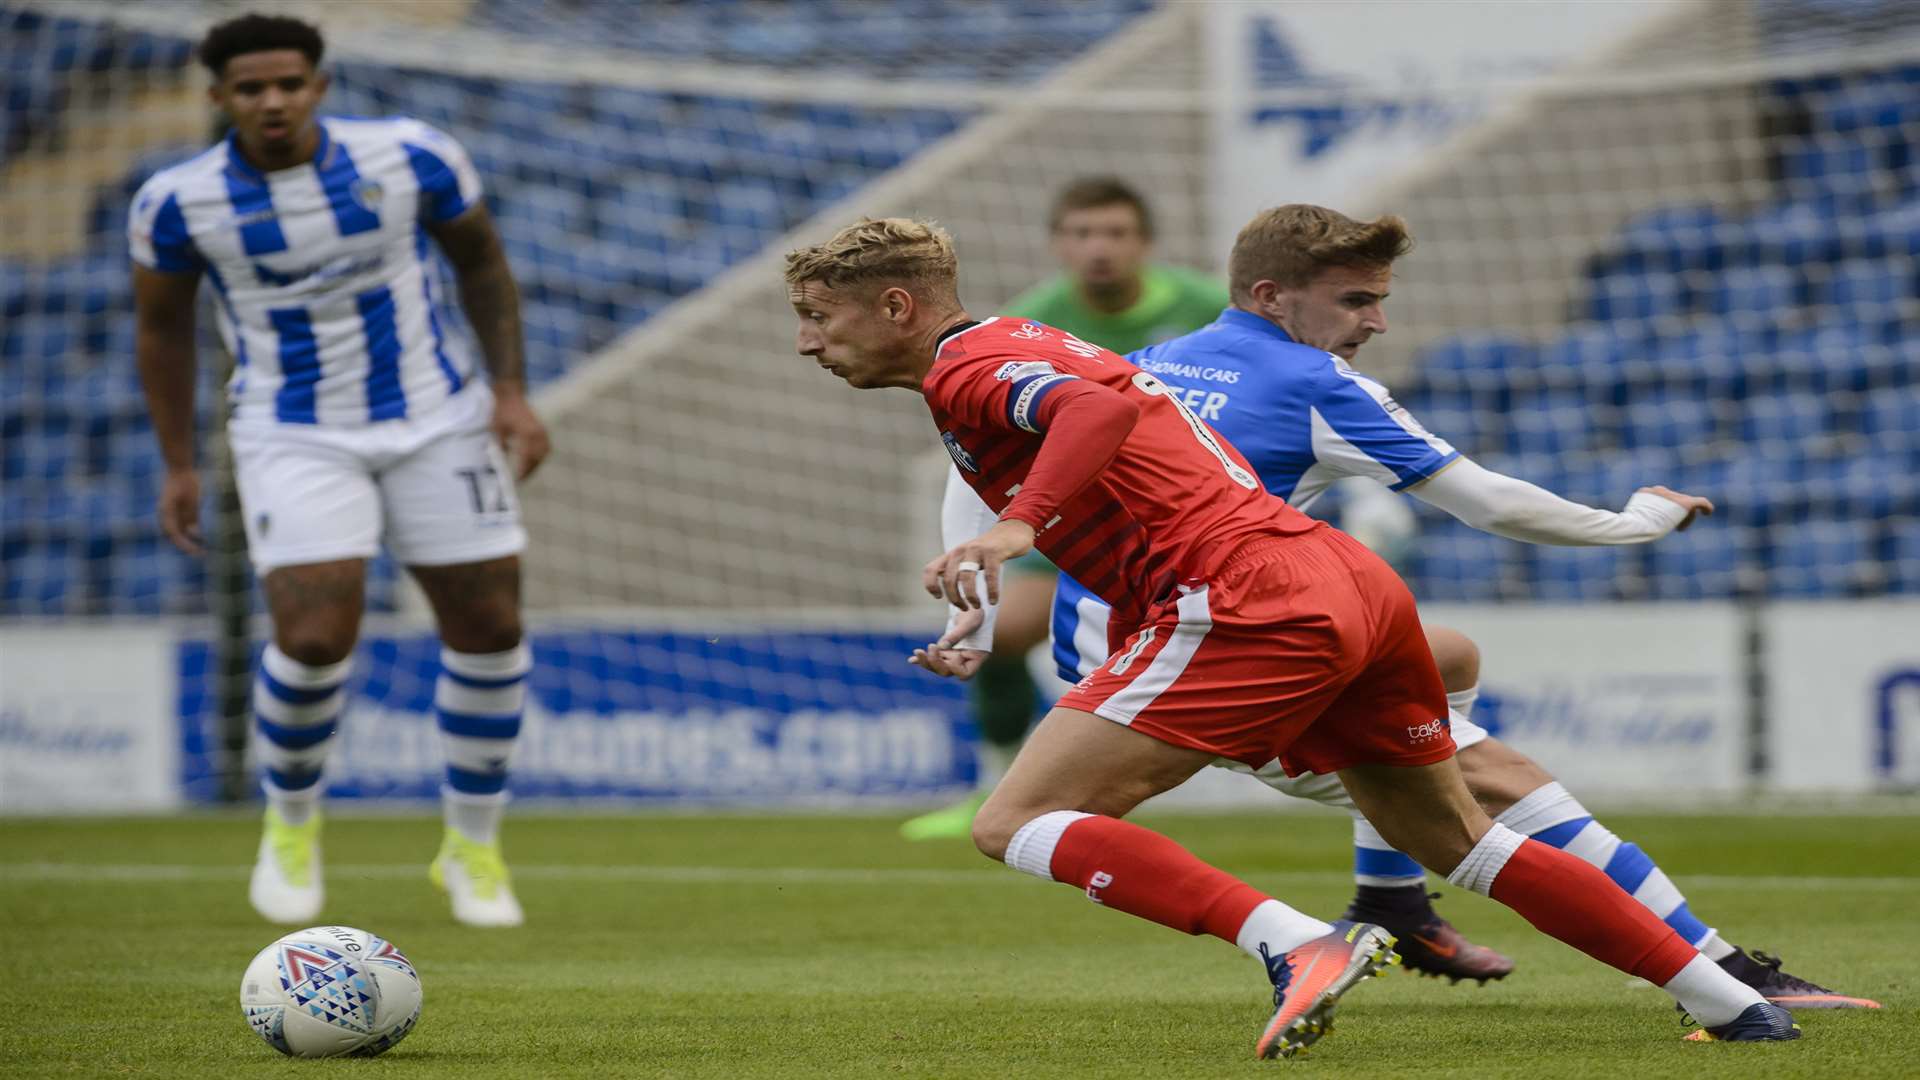 Lee Martin captained Gillingham team at Colchester in pre-season Picture: Andy Payton